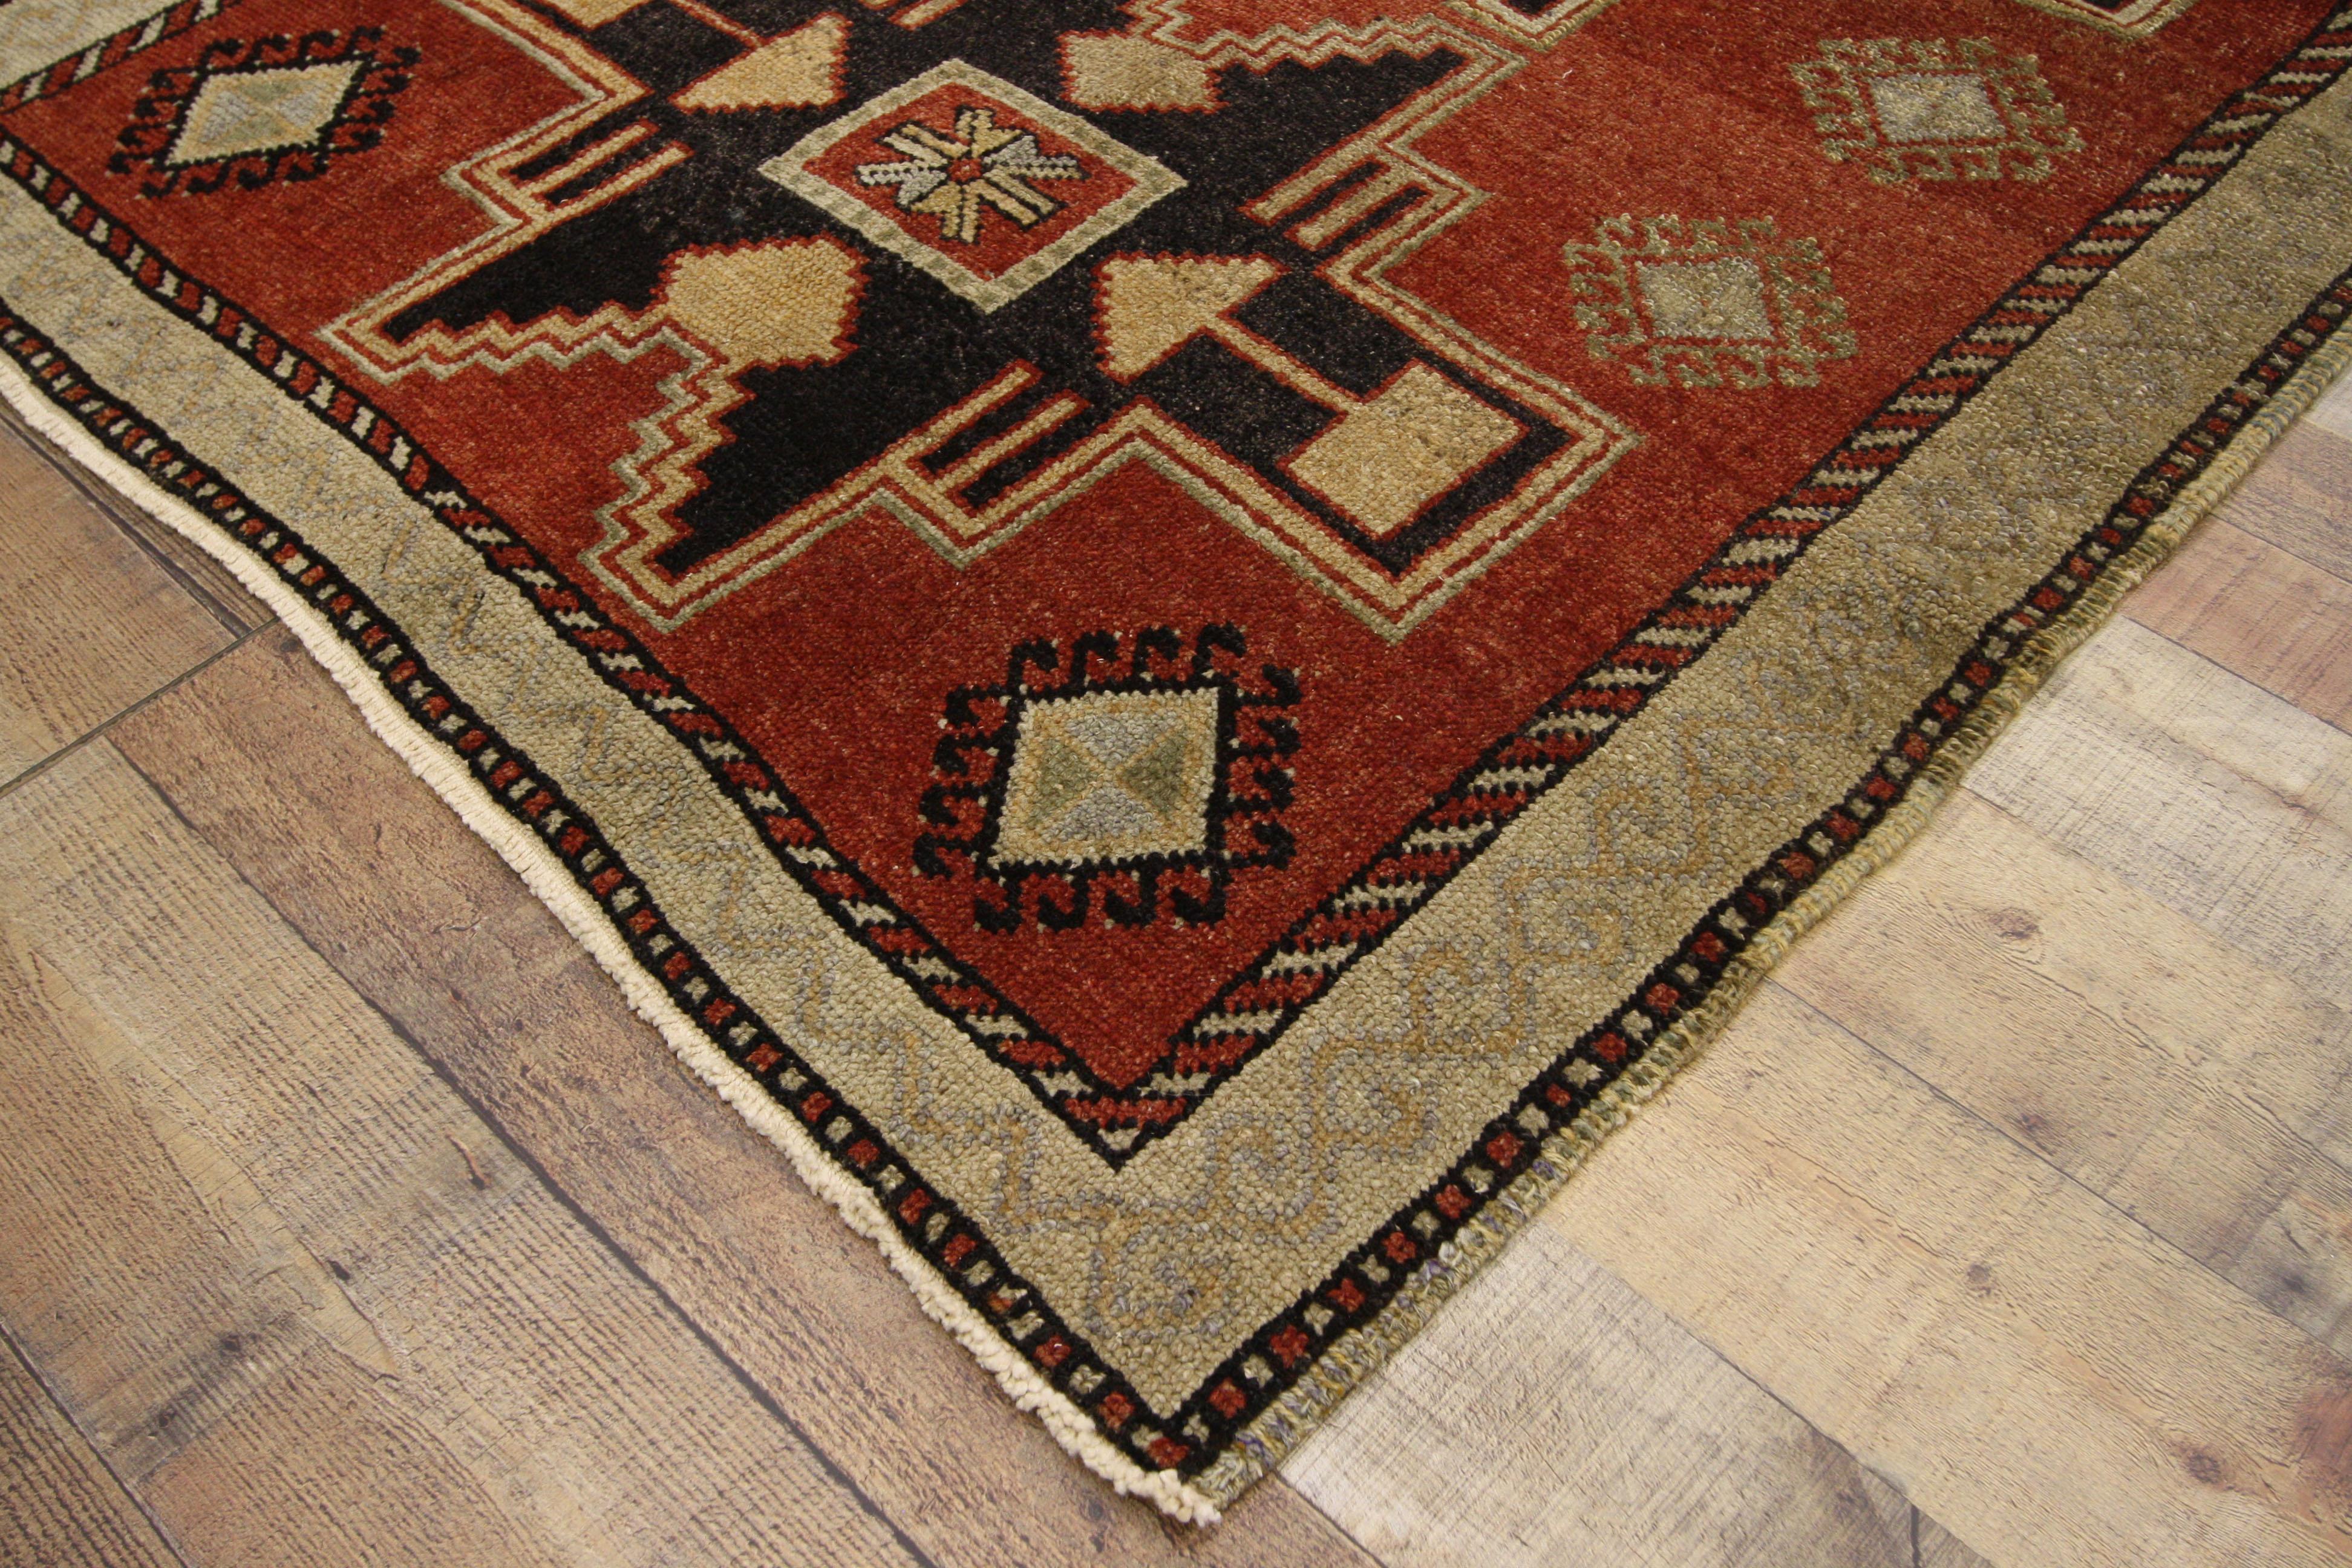 52389 Vintage Turkish Oushak Runner, Tribal Style Hallway Runner 03’10 x 11’01. This hand-knotted wool vintage Turkish Oushak runner features five angular geometric medallions, variations of the Lesghi star motif symbolizing happiness. Hook-edged